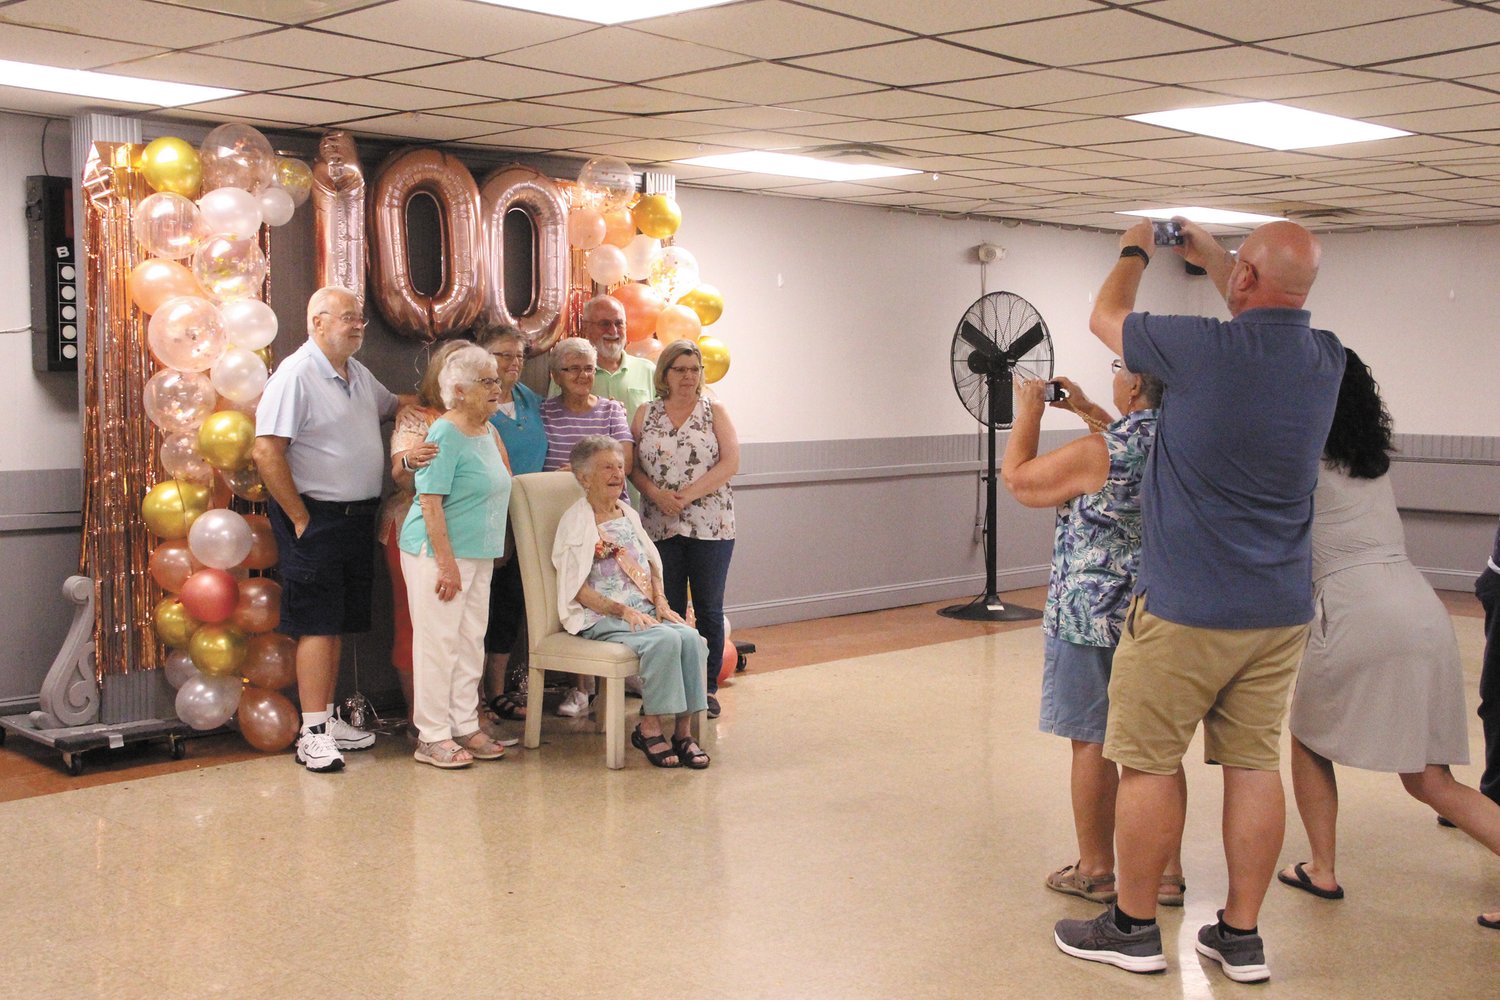 ONE OF MANY GROUP SHOTS: Betty’s daughter Dianne Dunsmore sets up a group photo with her mother.